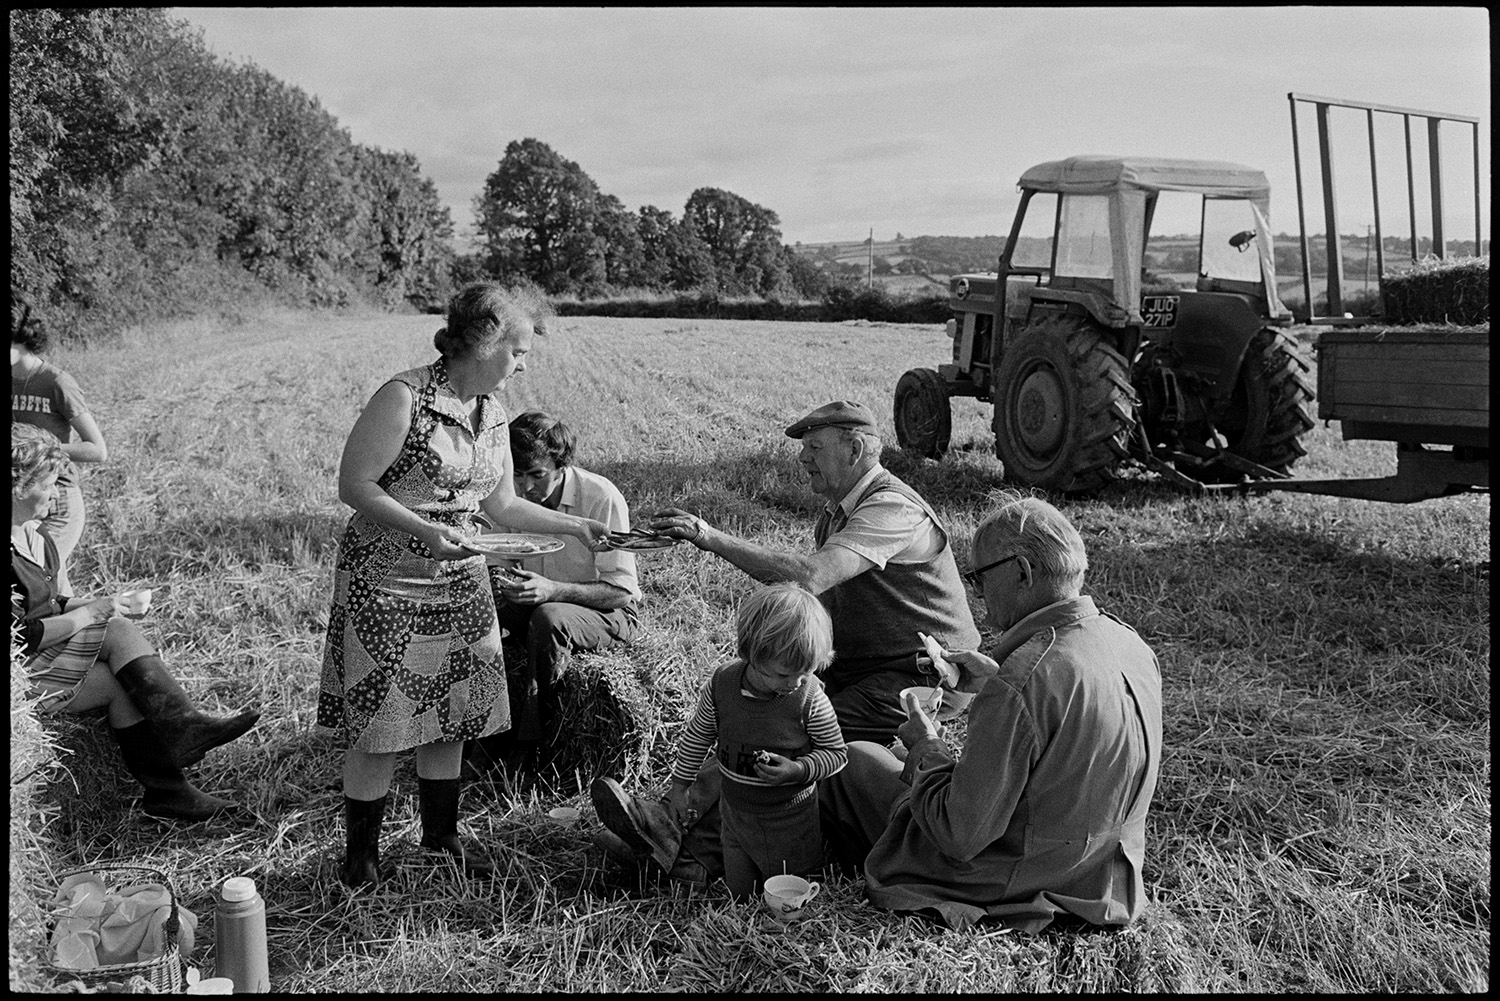 Harvesters tea in field. 
[The Ward family having a tea break from harvesting in a field at Nethercott, Iddesleigh. Hettie Ward is handing out food and a tractor and trailer is parked in the background.]